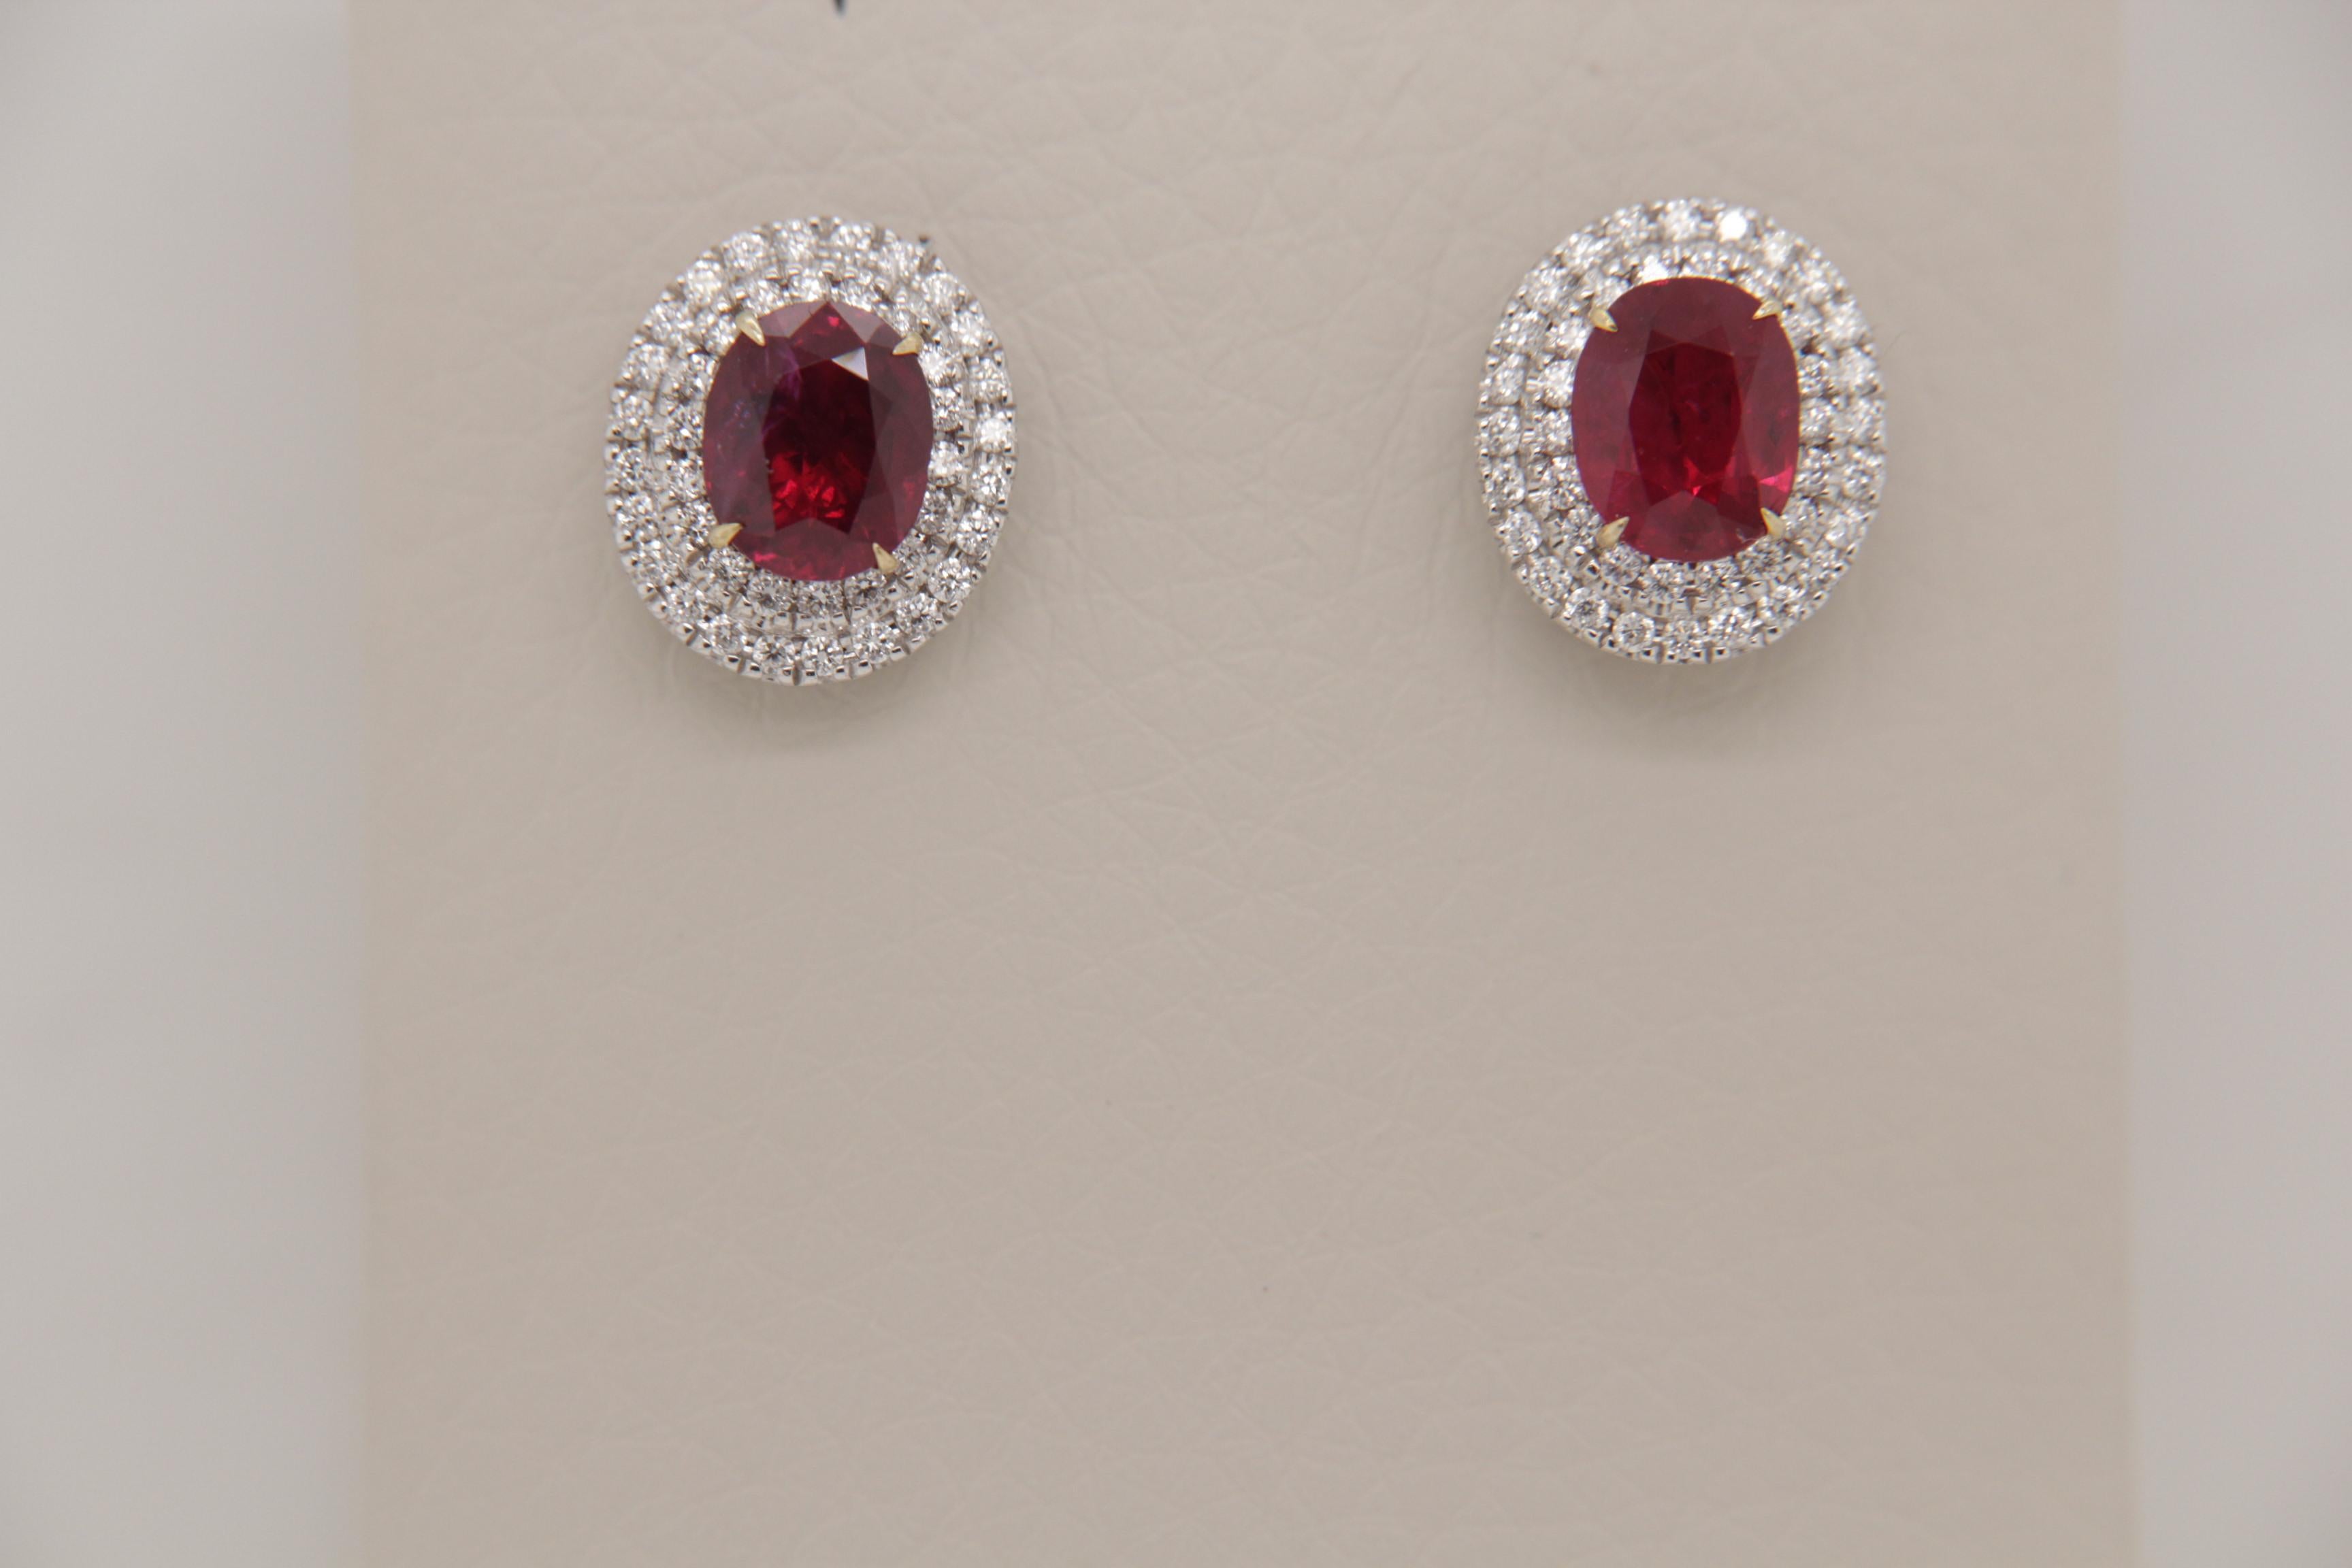 An eye catching pair of vibrant and rare Burmese ruby and diamond earrings. The ruby's shining lustre is complimented by the sparkling diamonds, this showcases the elegance of the piece . This rare piece will not only help to exude confidence and